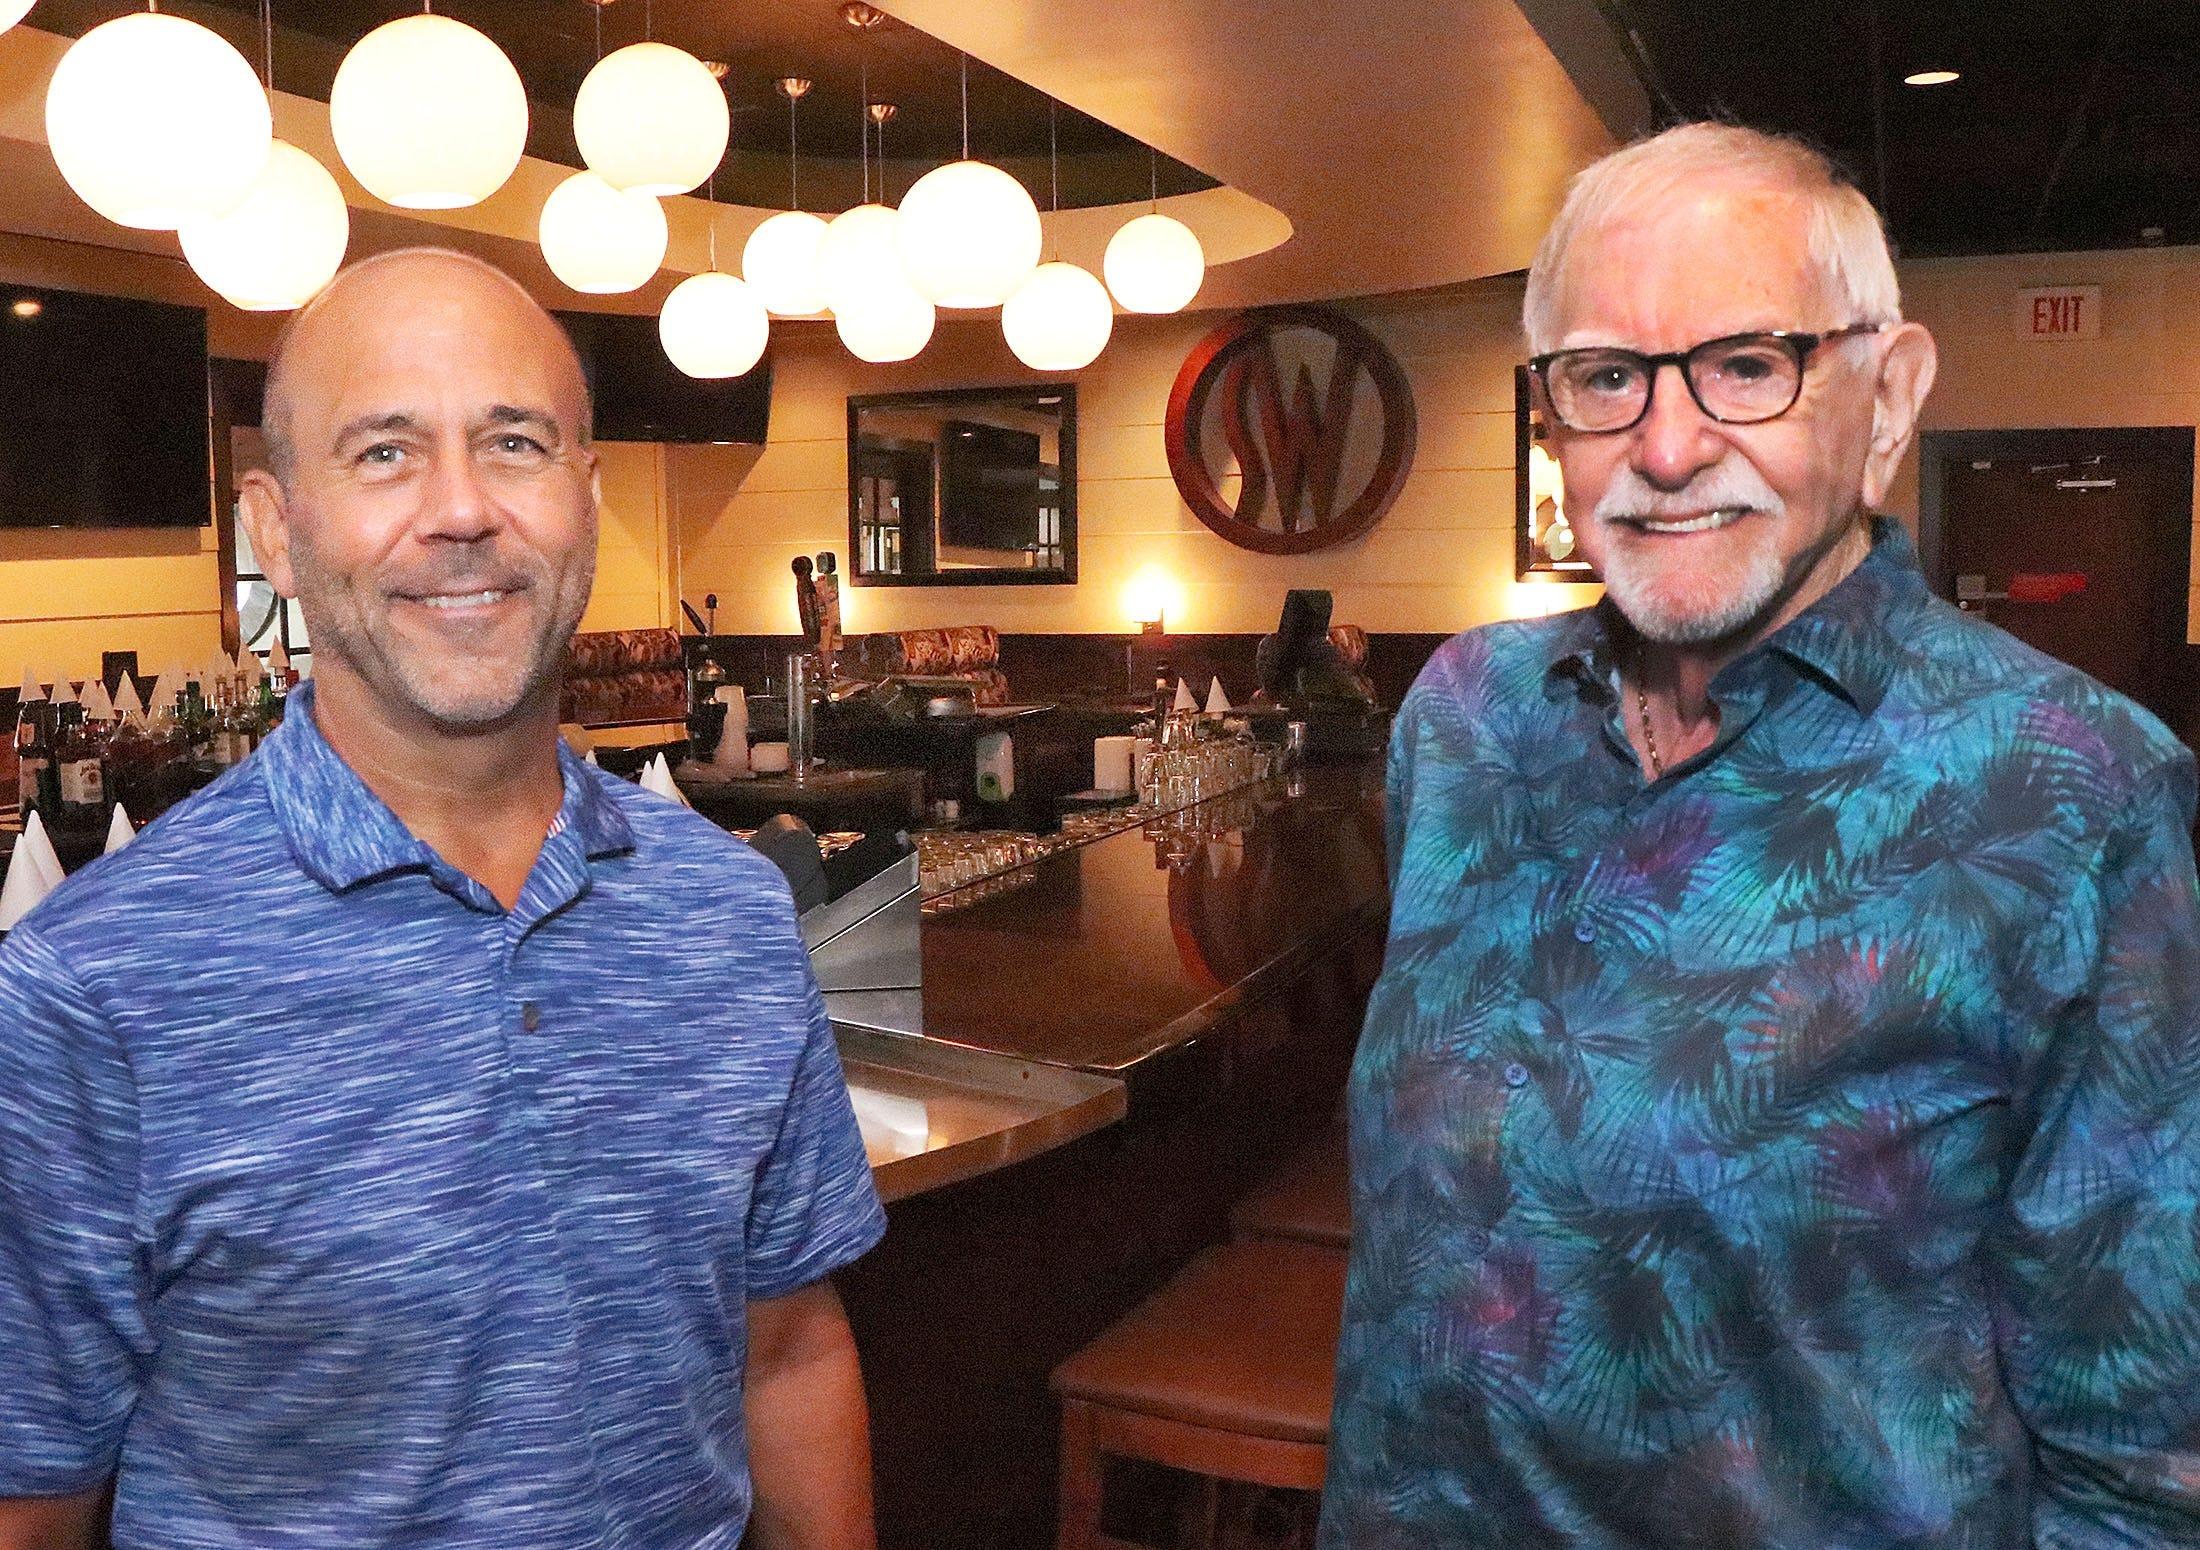 Attention to detail is the key to the longevity of Stonewood Grill & Tavern, a restaurant chain that recently celebrated its 20th anniversary, said L. Gale Lemerand, chairman of Stonewood Holdings (at right) and Steve Papero, the company